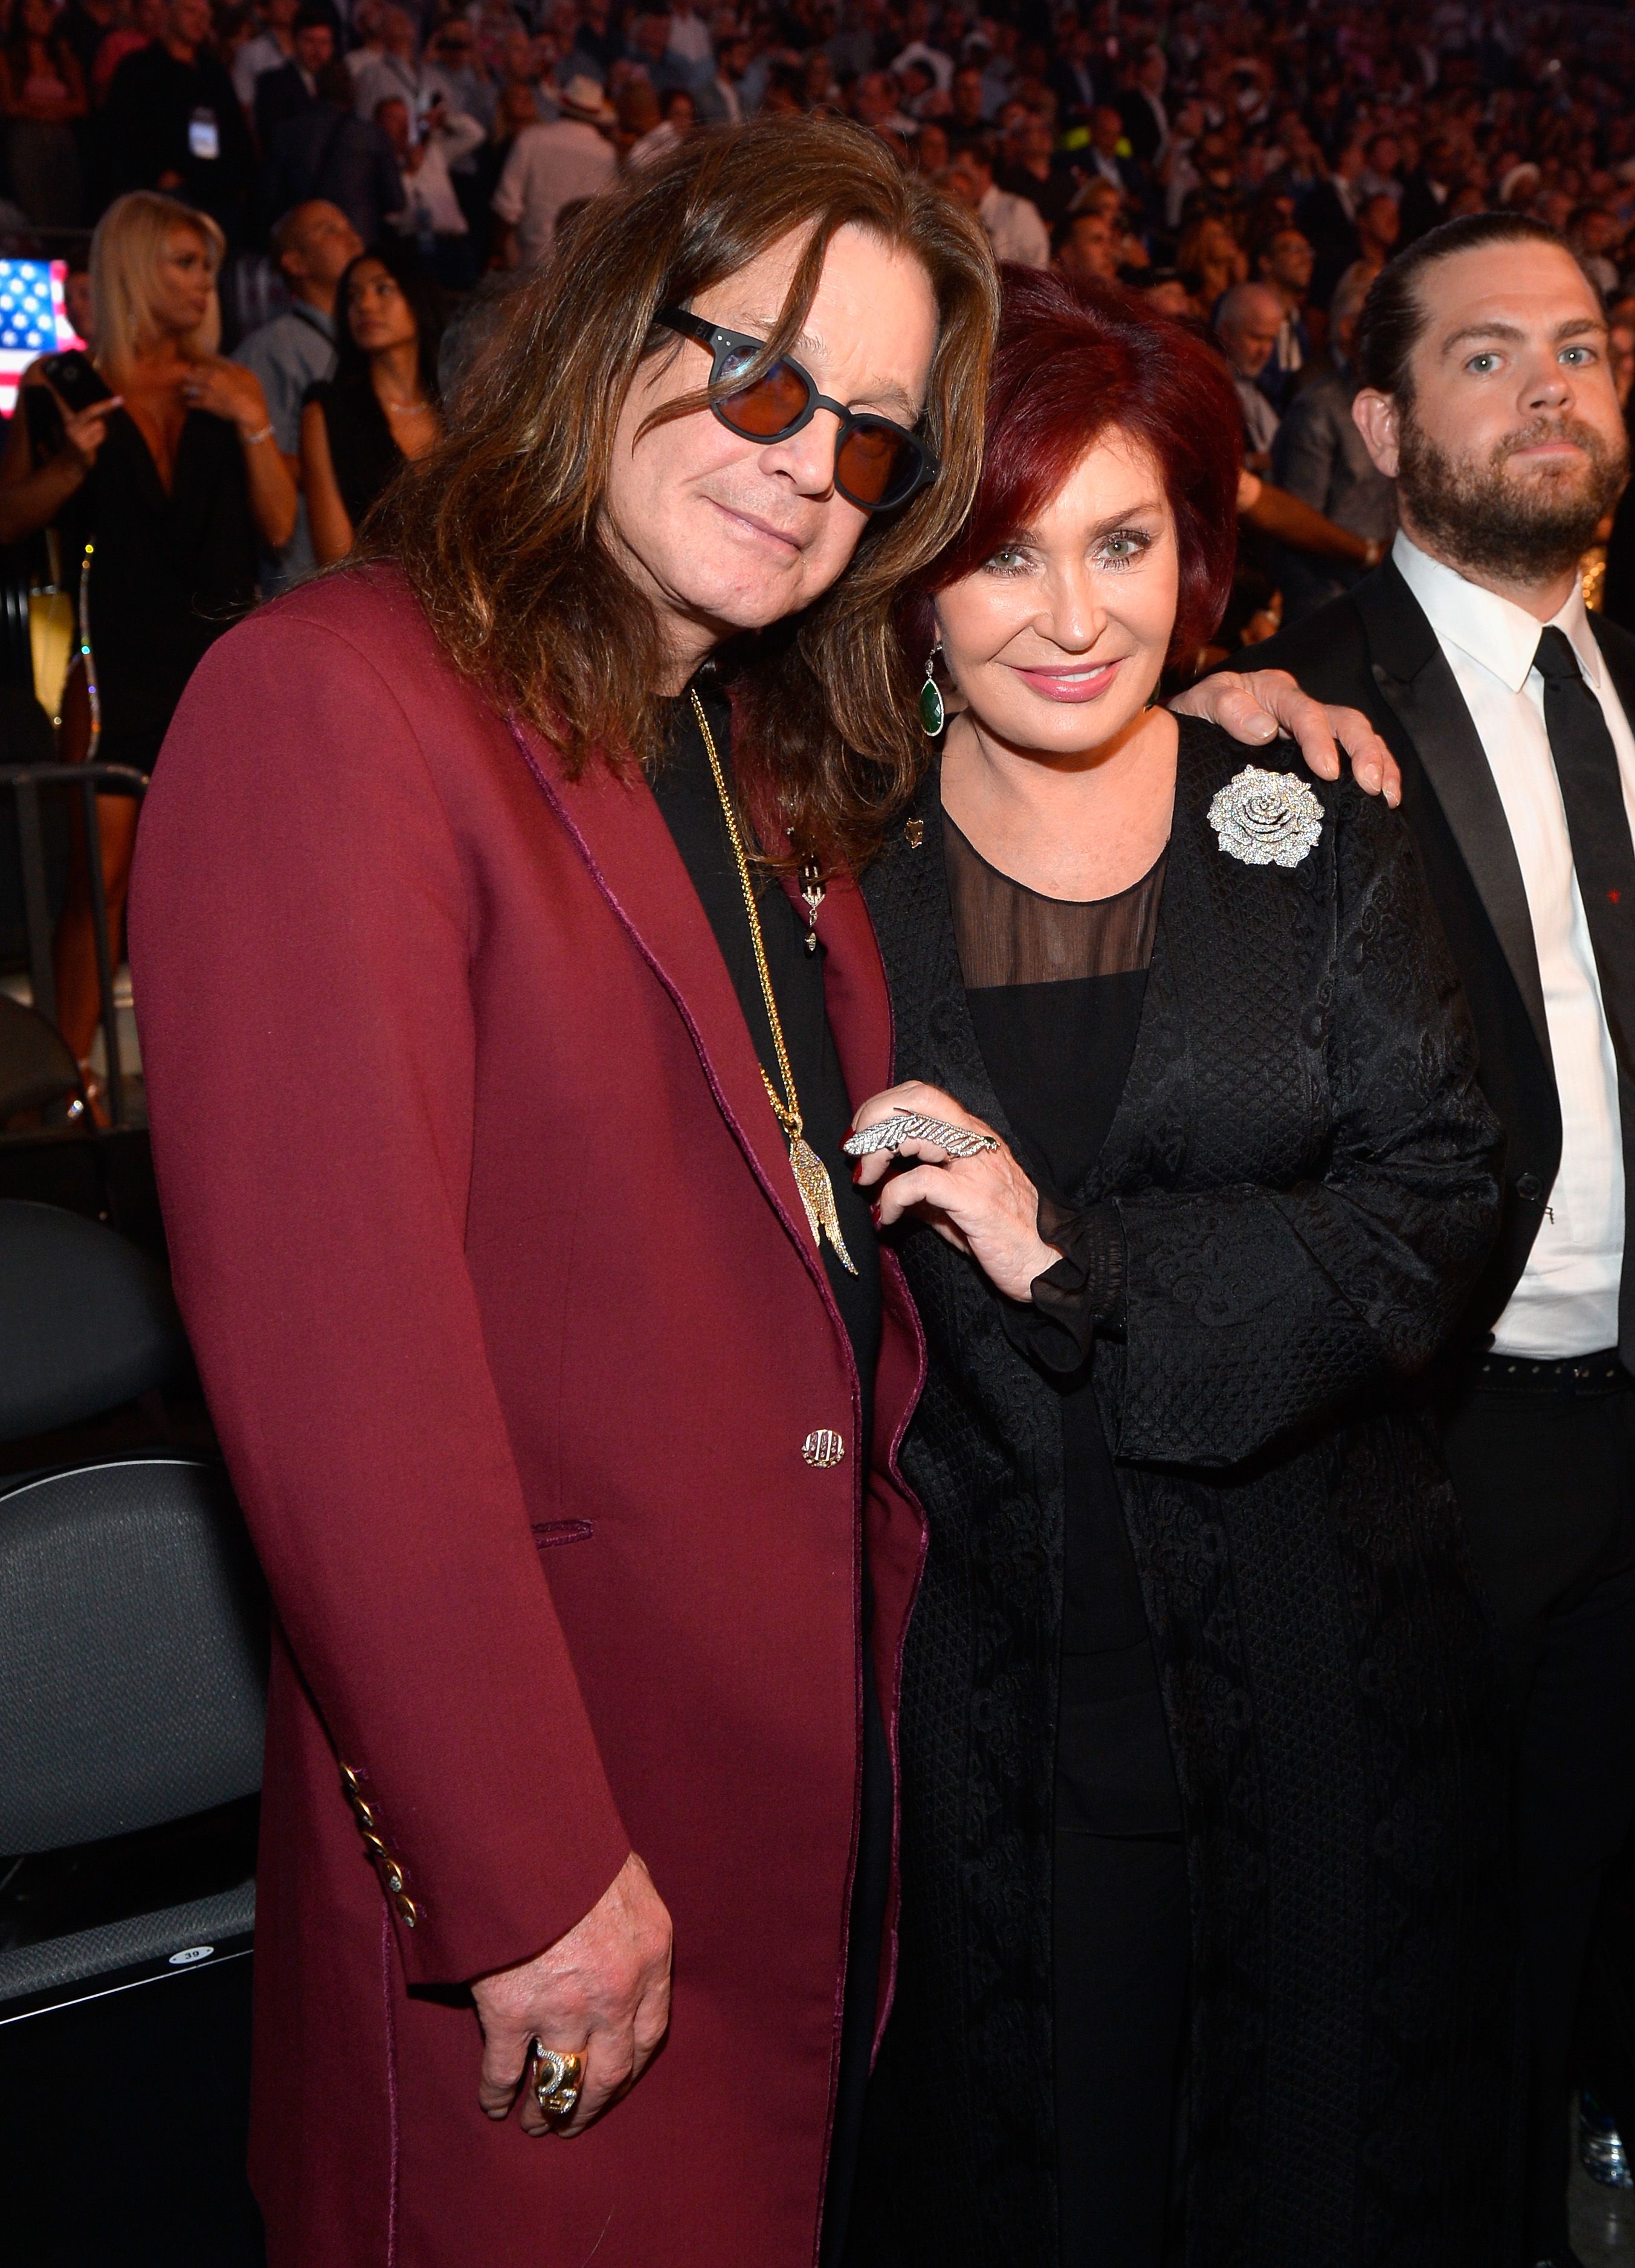 Ozzy Osbourne and Sharon Osbourne at the Showtime, WME IME and Mayweather Promotions VIP Pre-Fight party in 2017 | Source: Getty Images